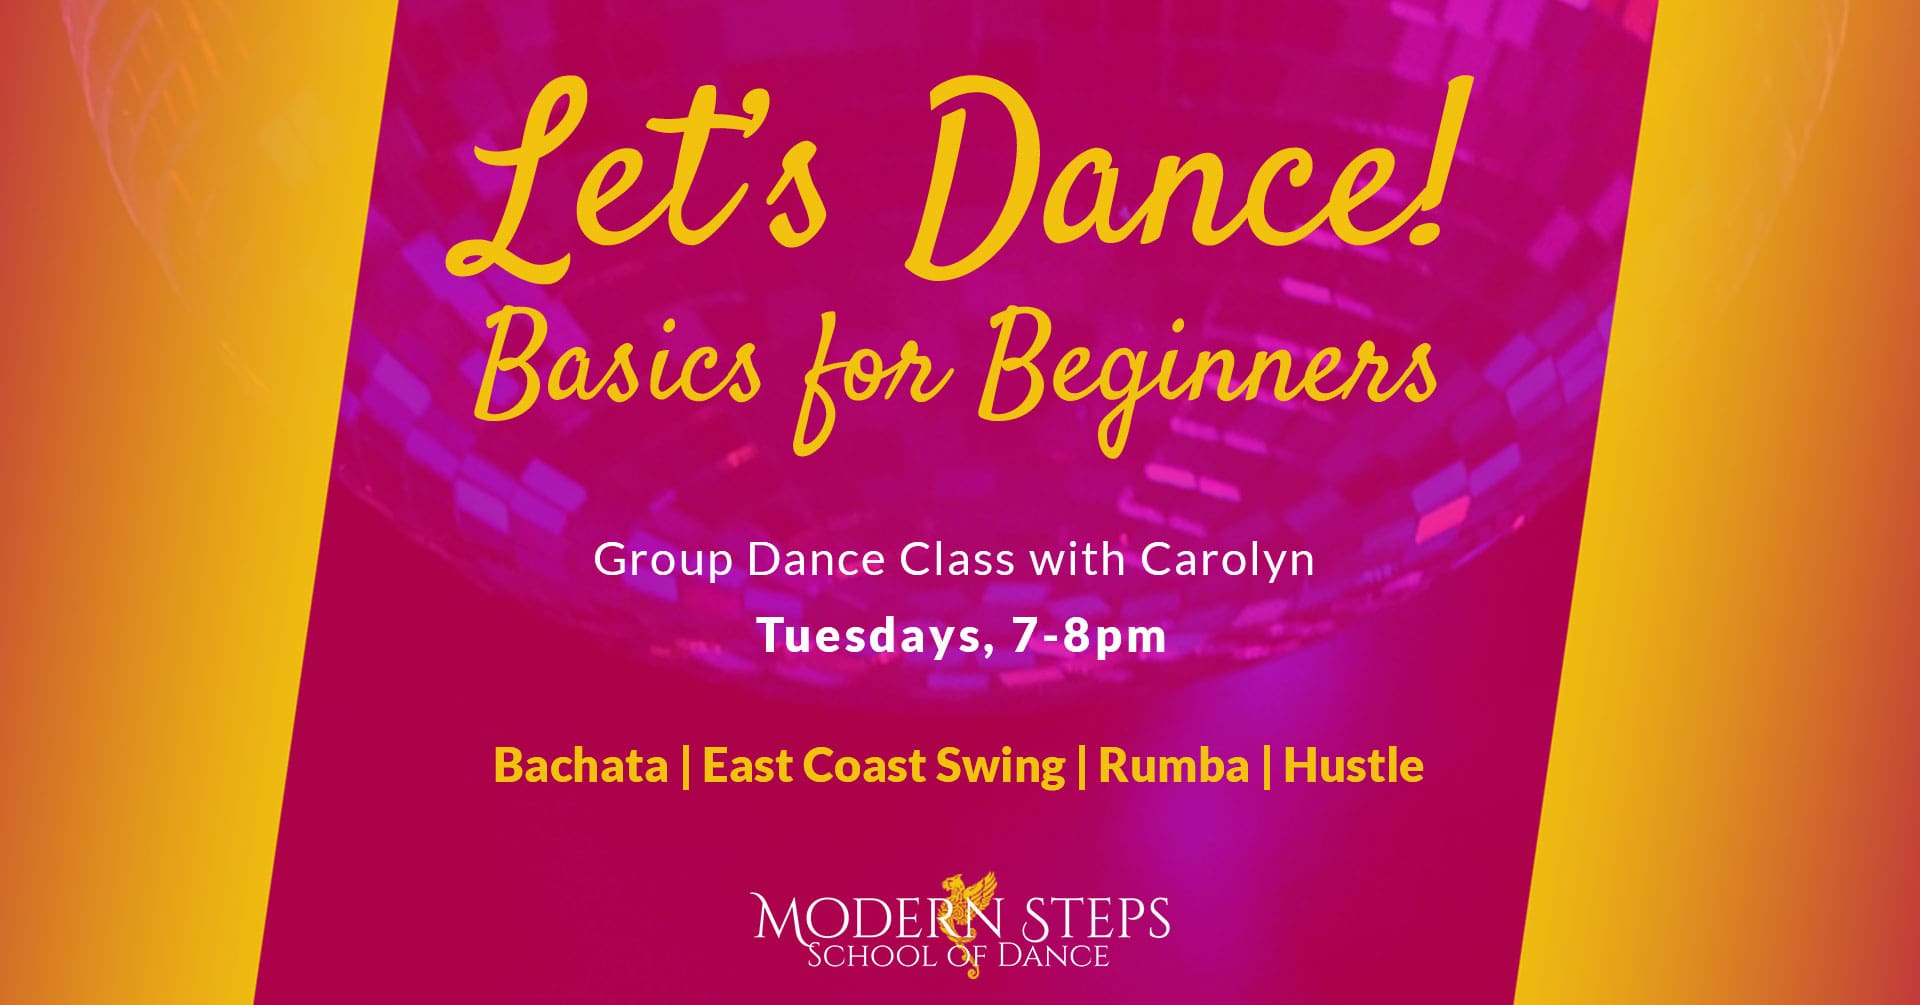 Modern Steps School of Dance Naples Florida The Hustle Dance Classes - Group Ballroom Dance Lessons - Naples Florida Things to Do -- Let's Dance! Basics for Beginners with Carolyn Bivens